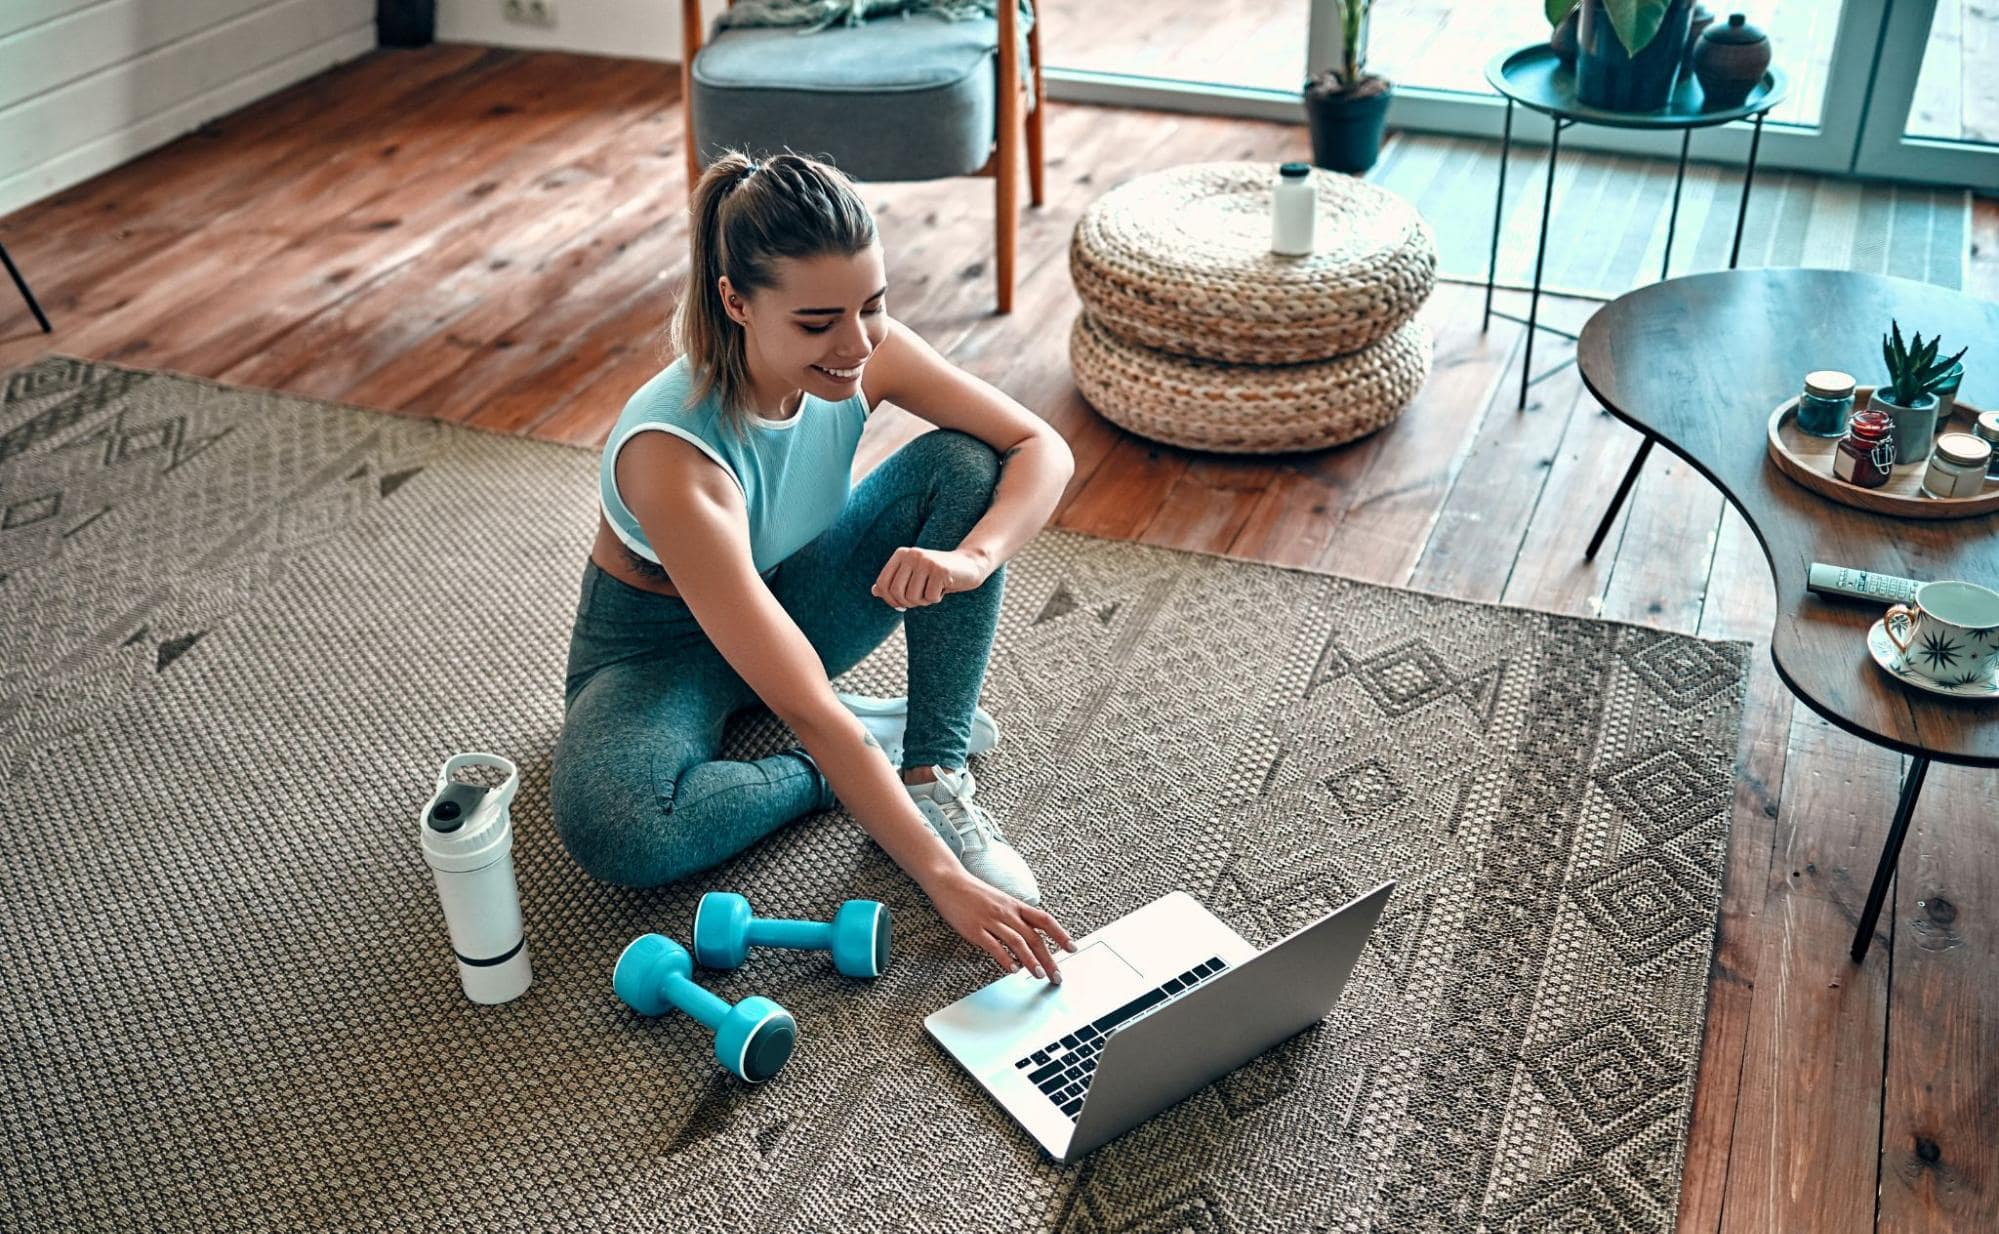 A young woman working out at home using her laptop for home workout videos.